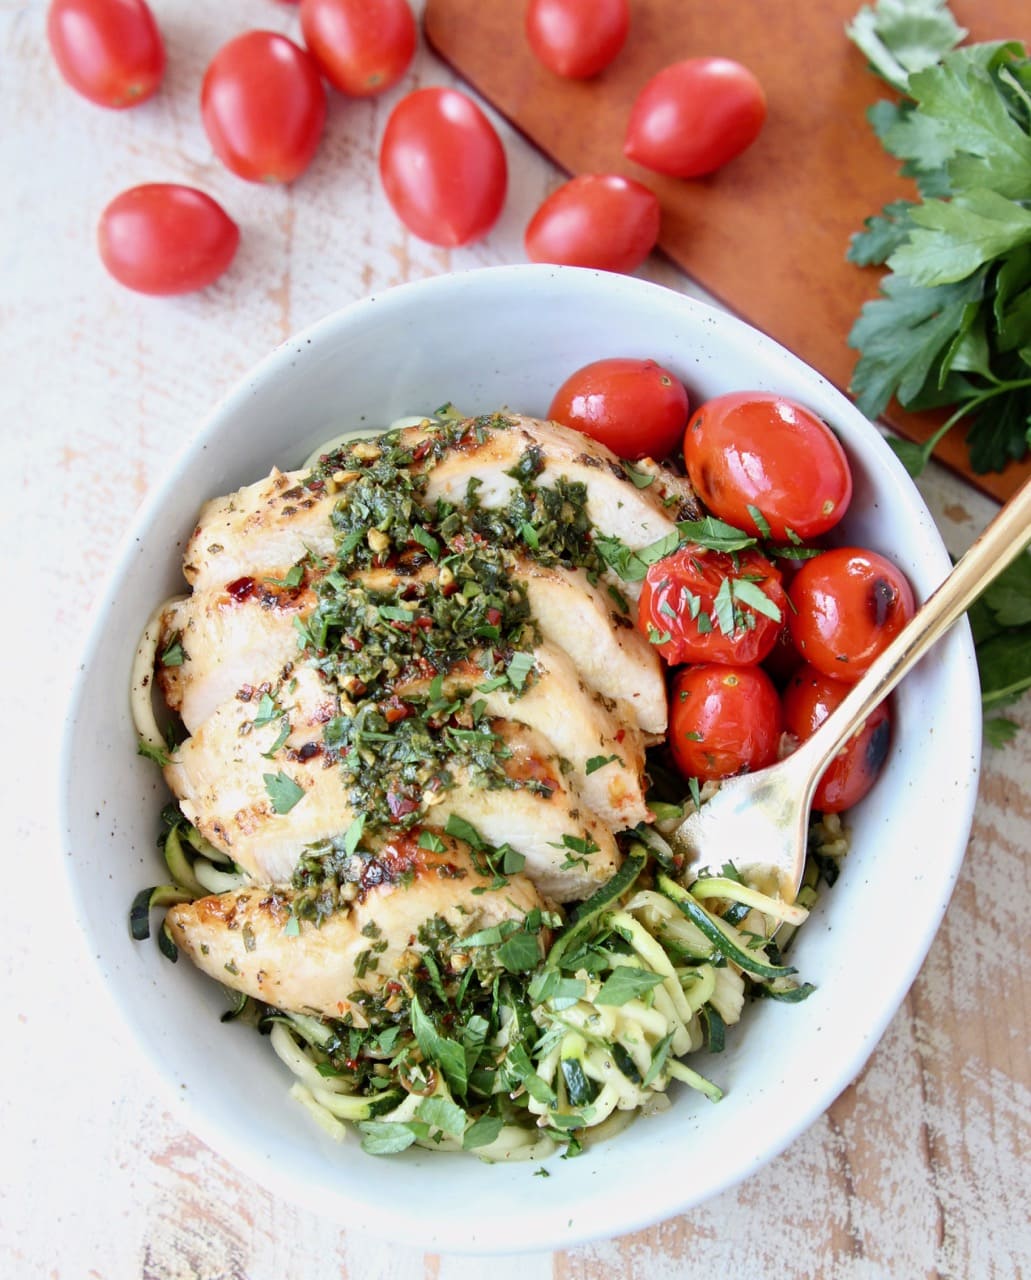 Zucchini Noodles with Grilled Chimichurri Chicken and Cherry Tomatoes